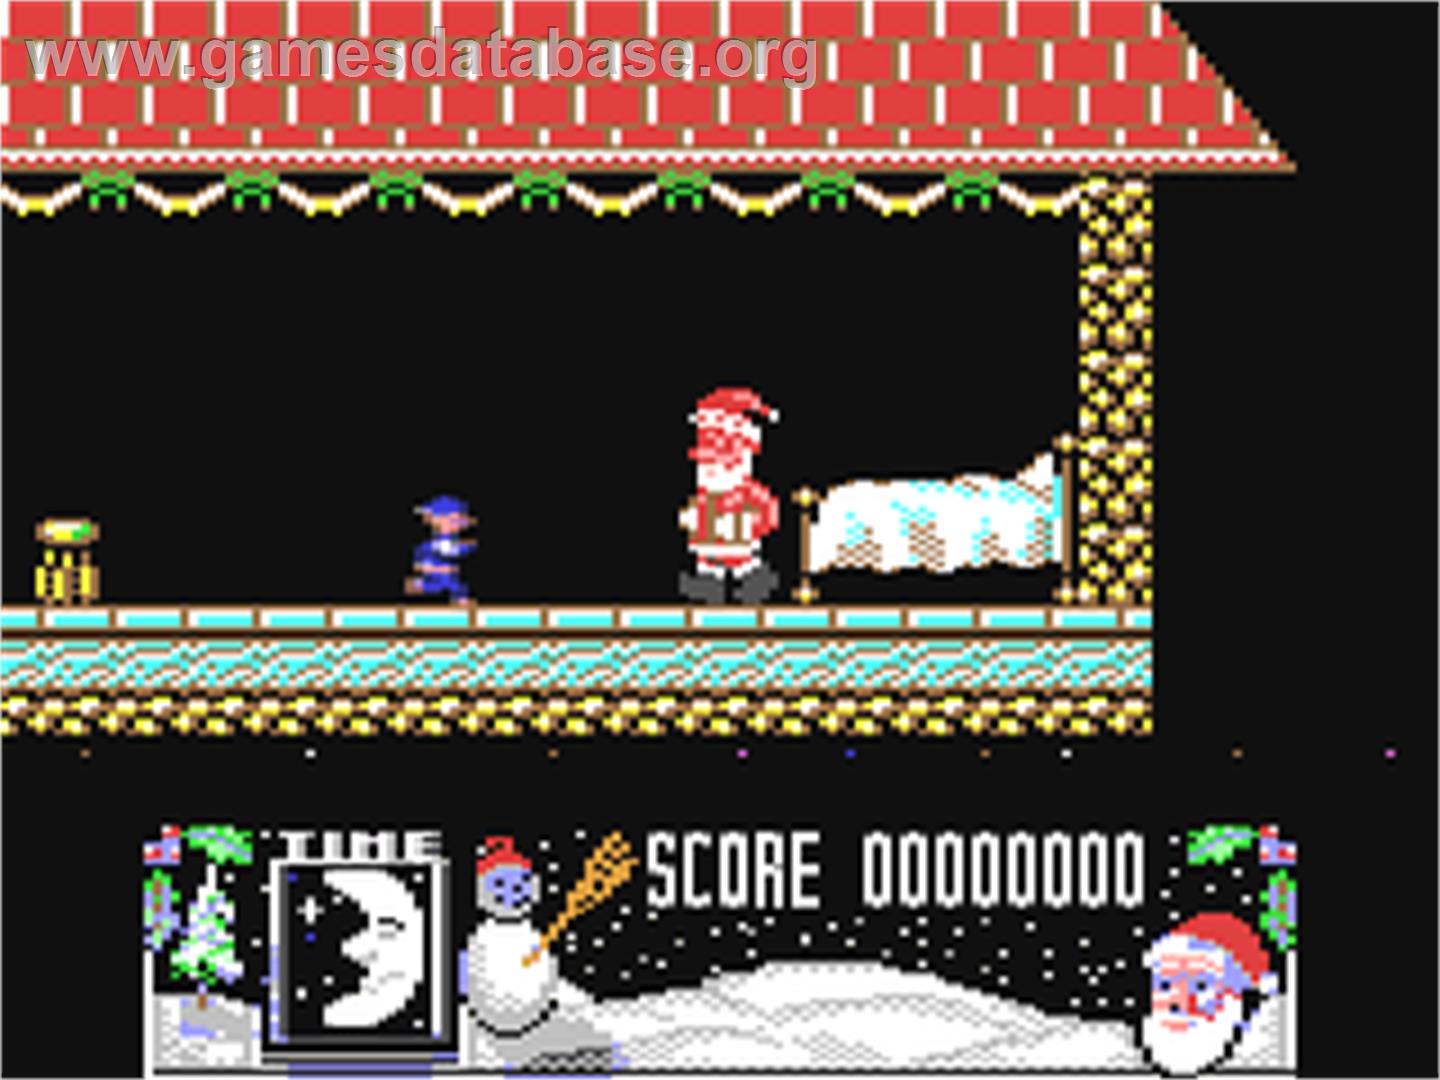 The Official Father Christmas - Commodore 64 - Artwork - In Game